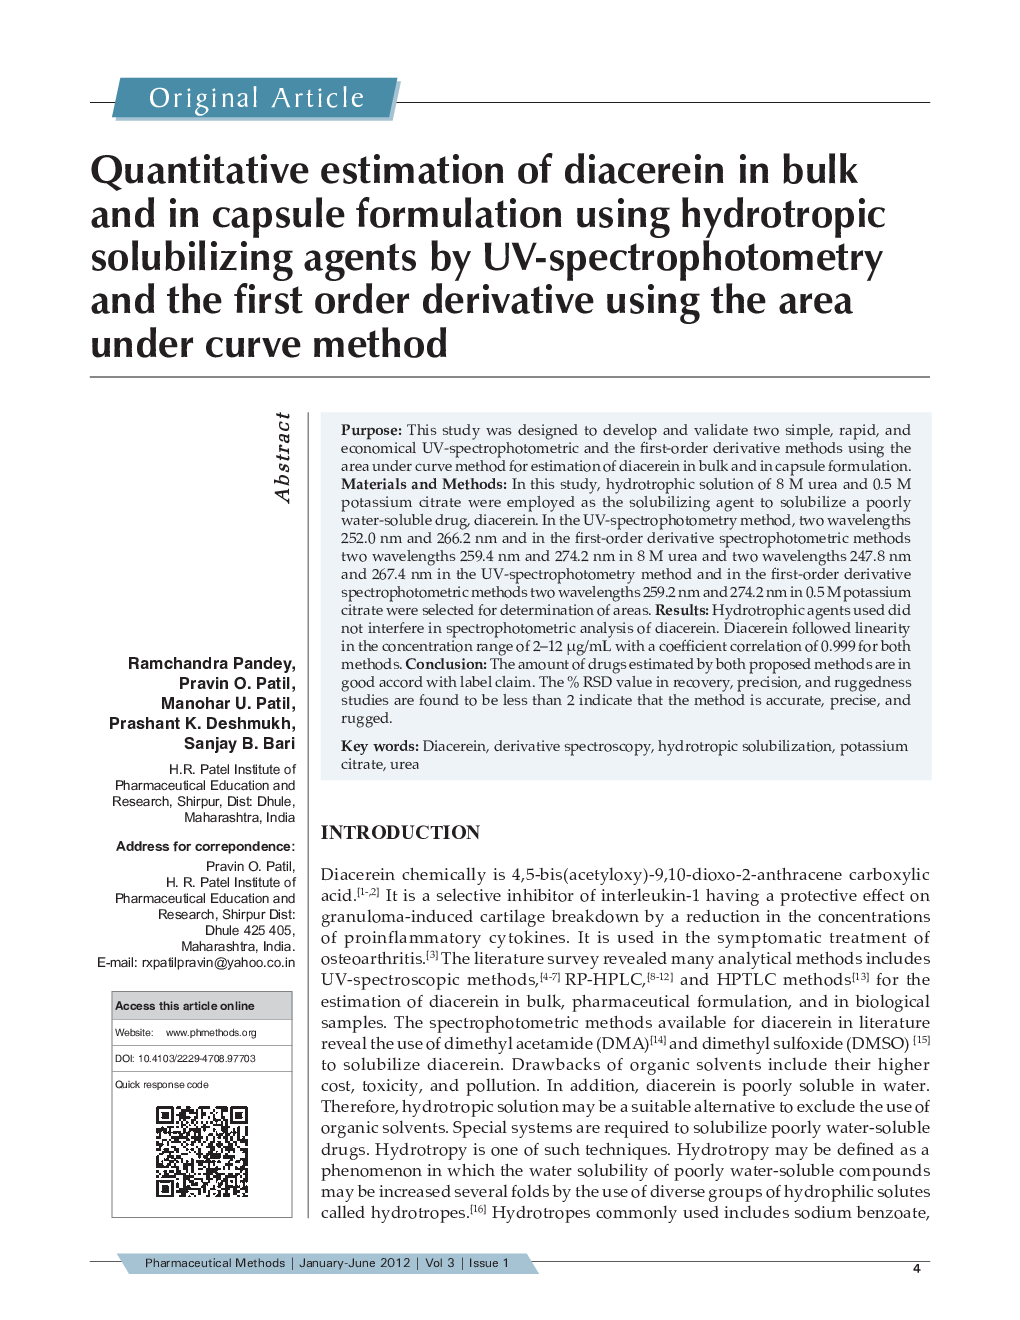 Quantitative estimation of diacerein in bulk and in capsule formulation using hydrotropic solubilizing agents by UV-spectrophotometry and the first order derivative using the area under curve method